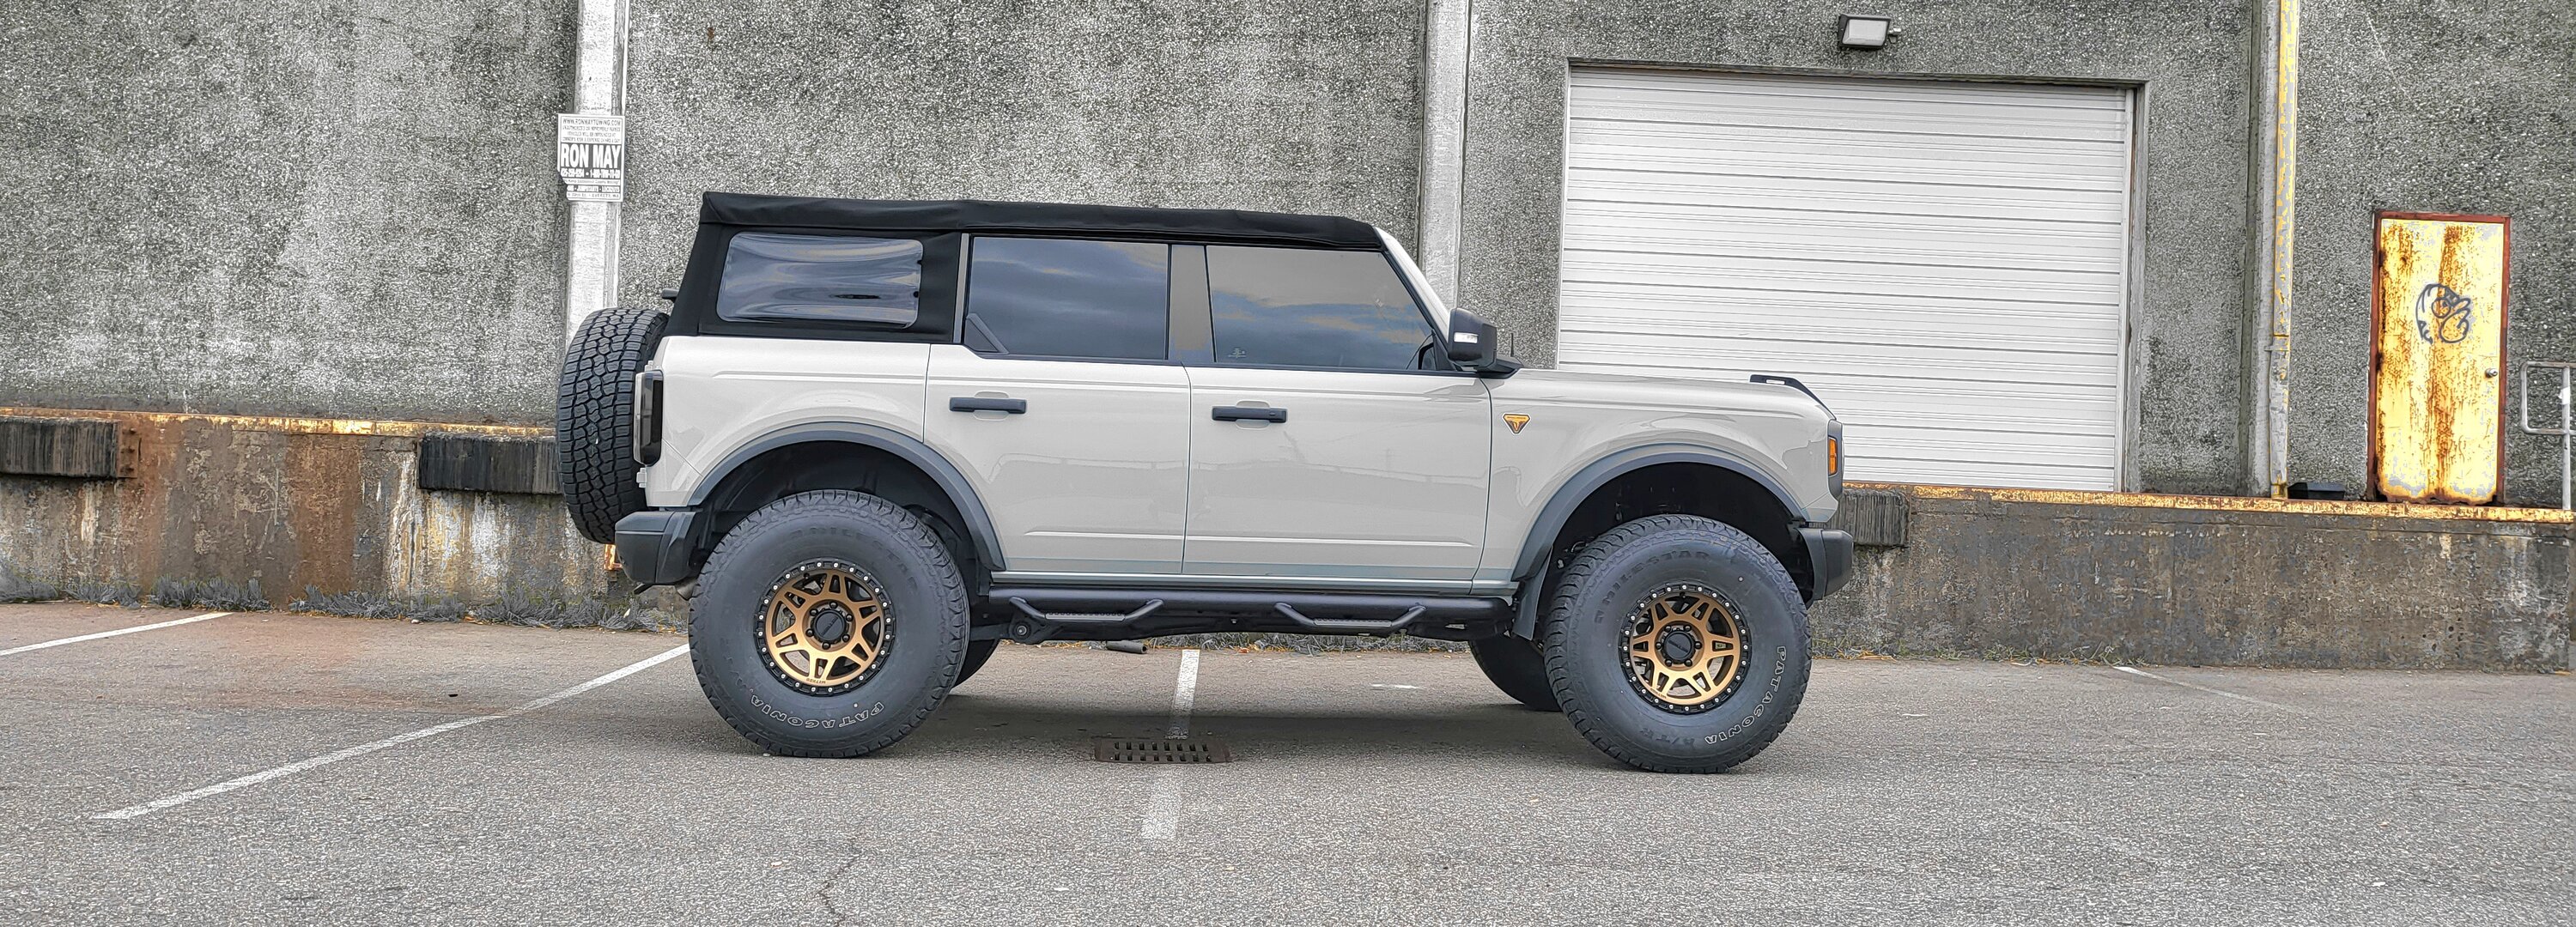 Ford Bronco Show us your installed wheel / tire upgrades here! (Pics) 20220904_153802